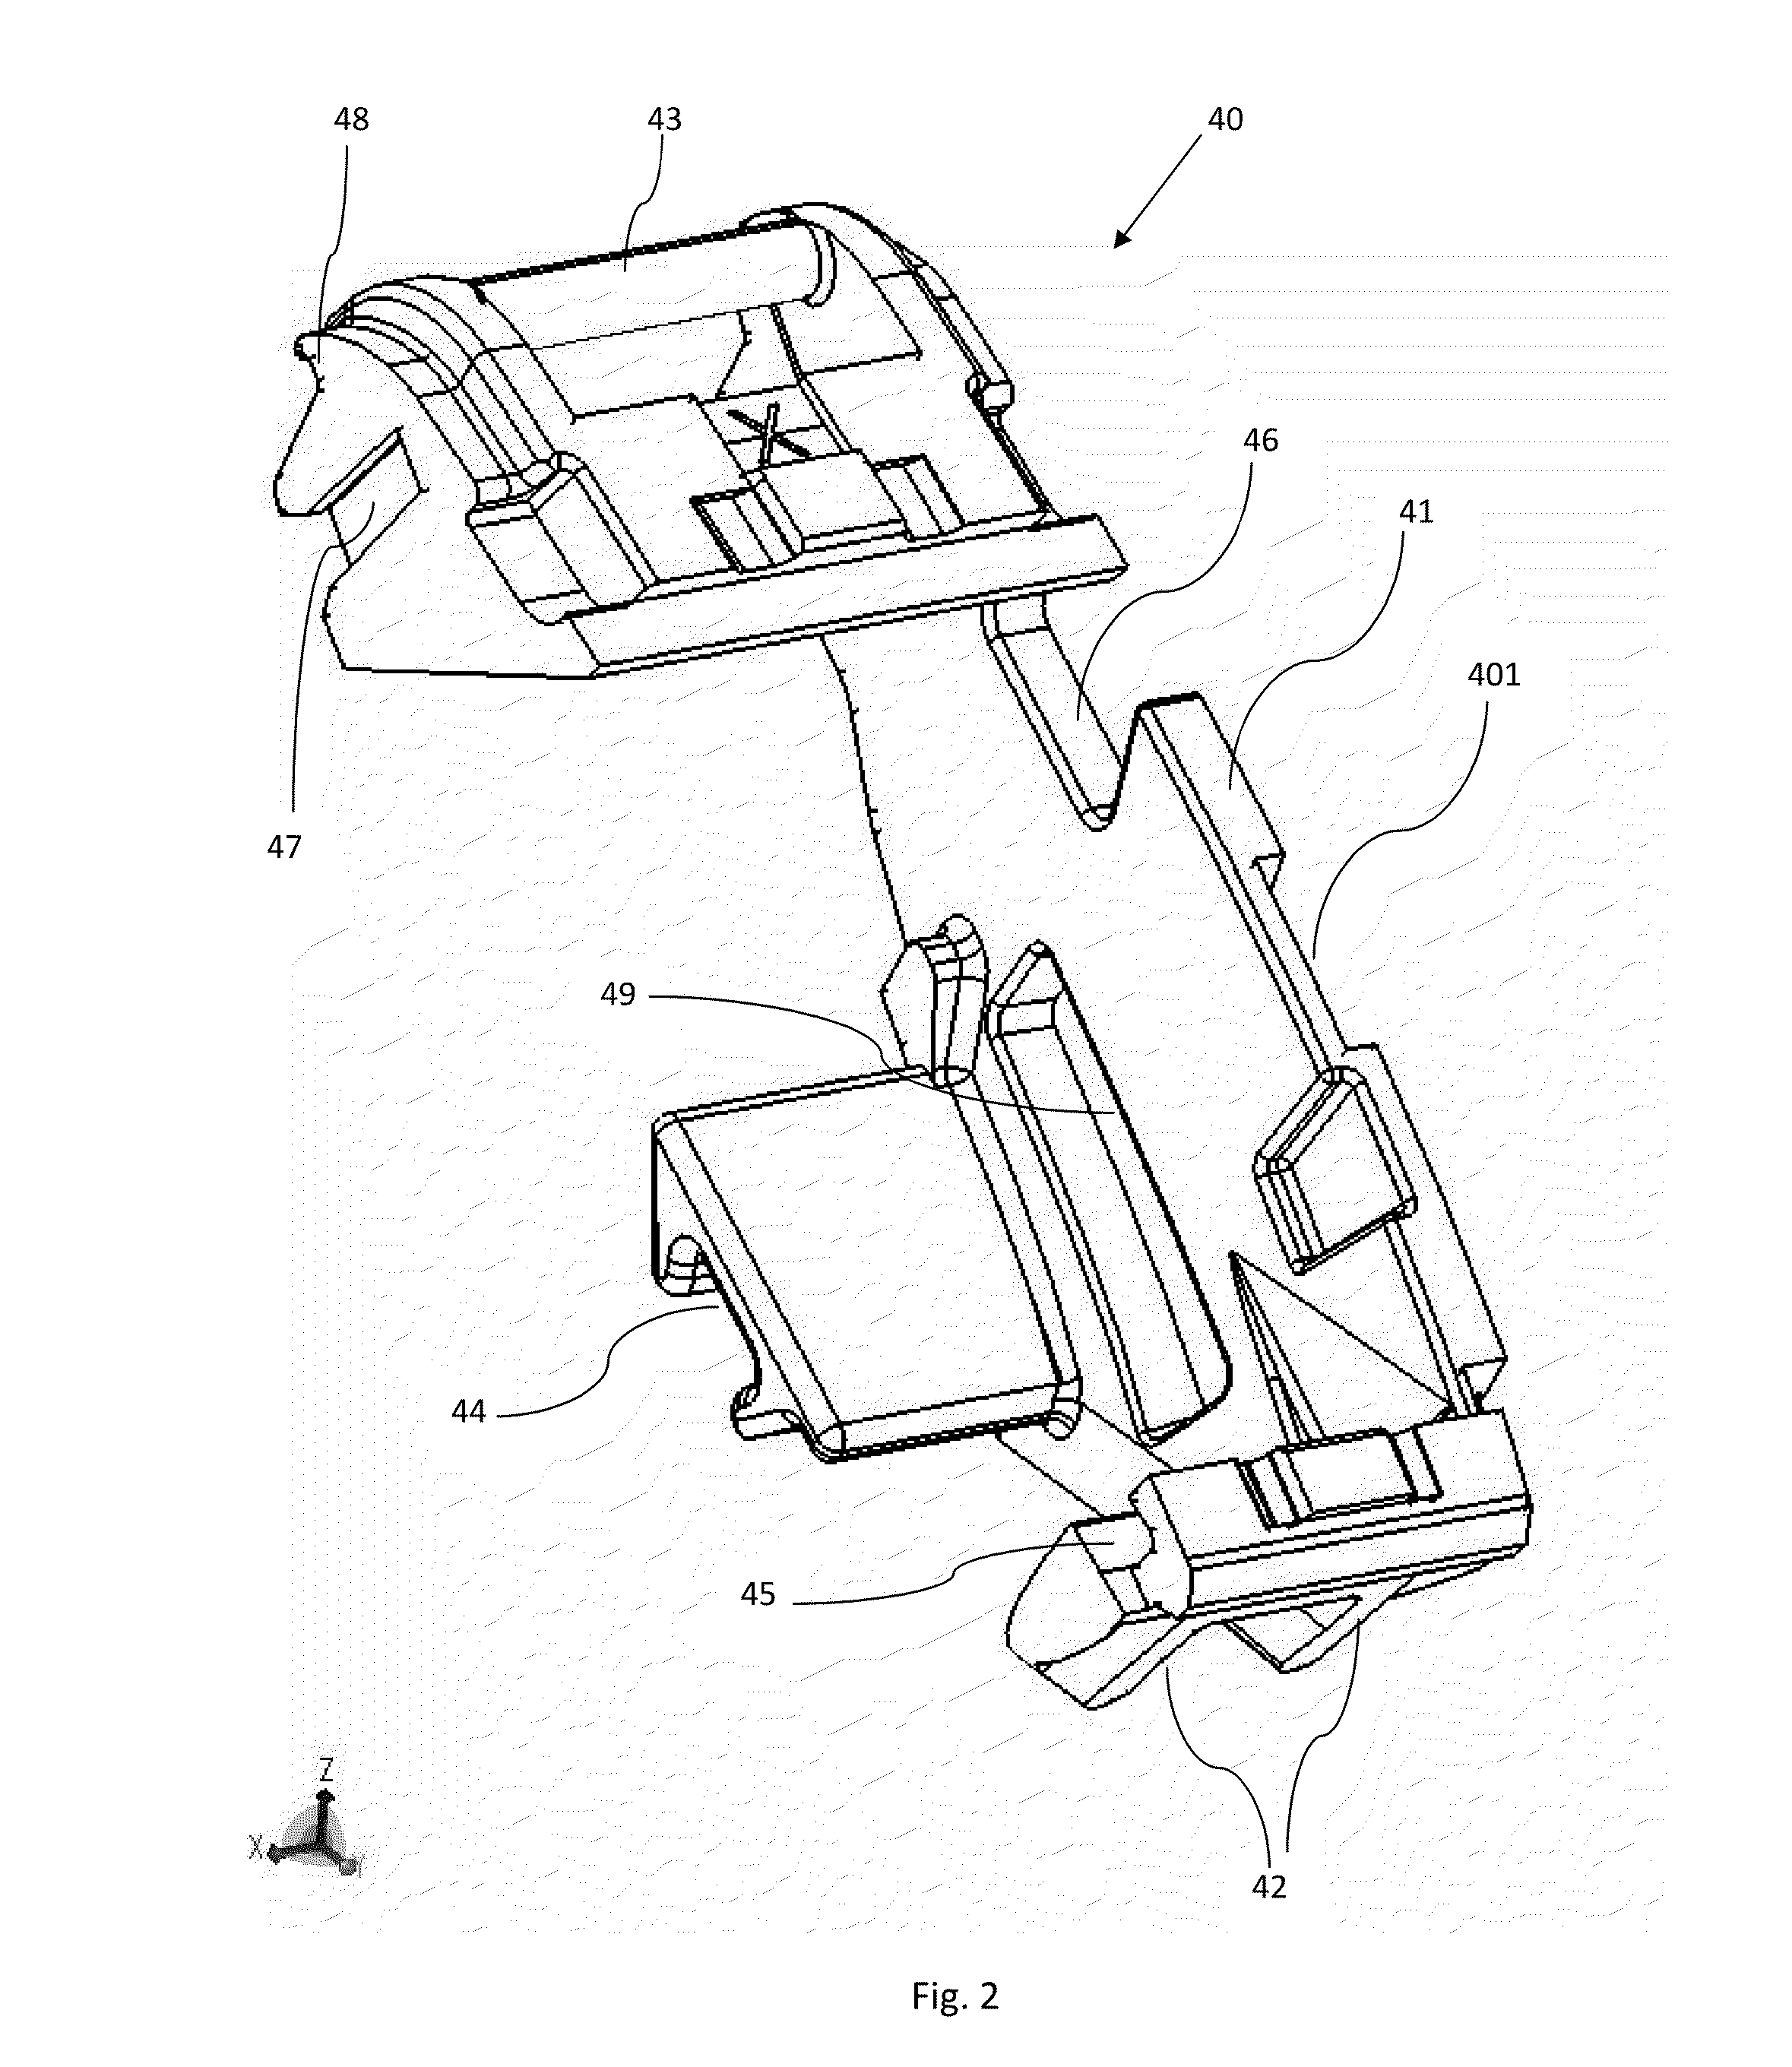 Hearing aid with exchangeable shell parts and wireless communication